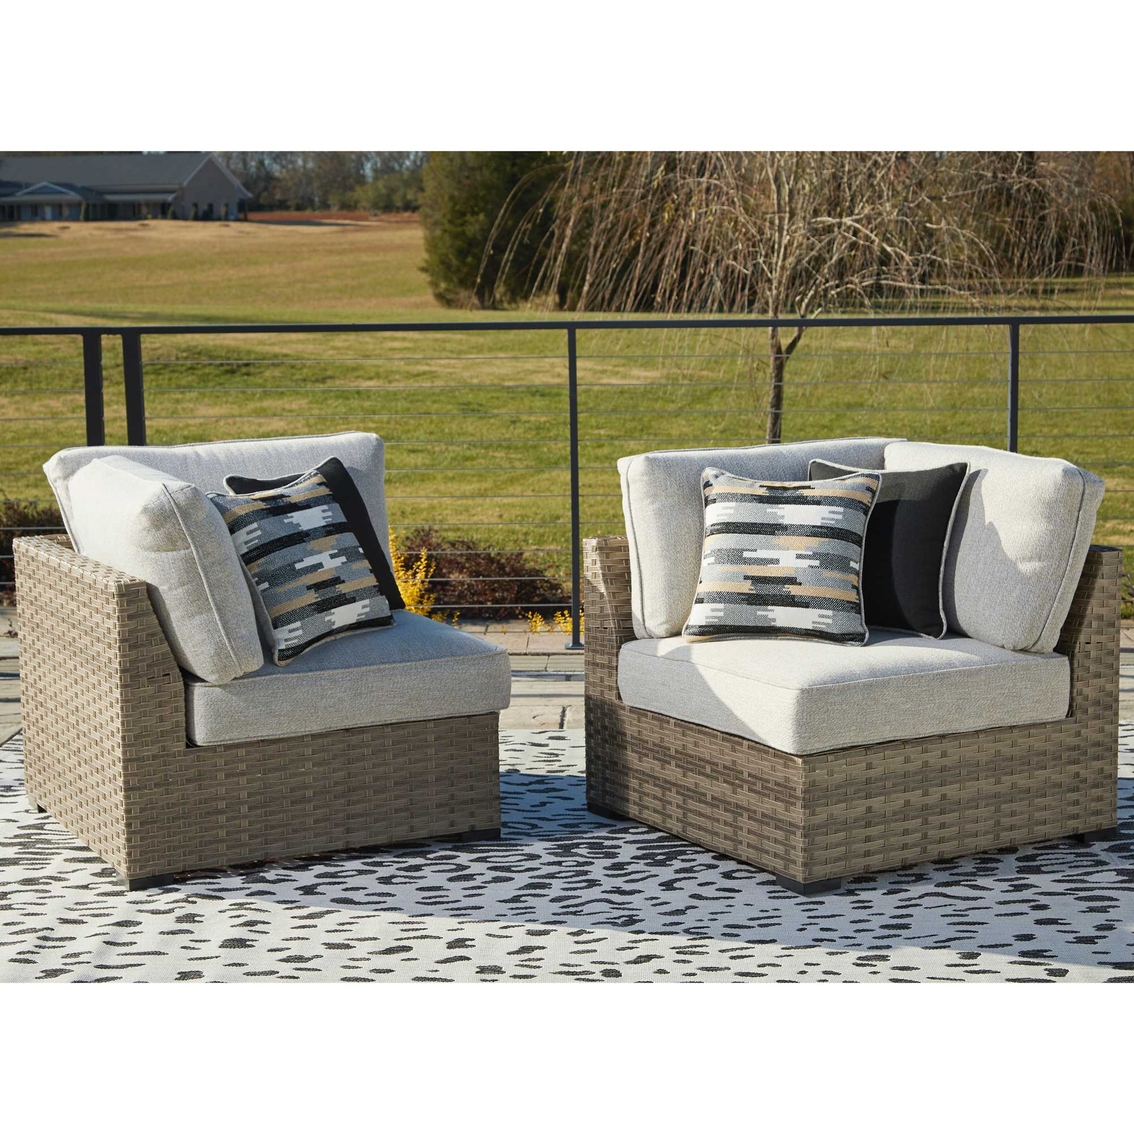 Signature Design by Ashley Calworth Outdoor 10 pc. Set with Firepit Table - Image 3 of 10